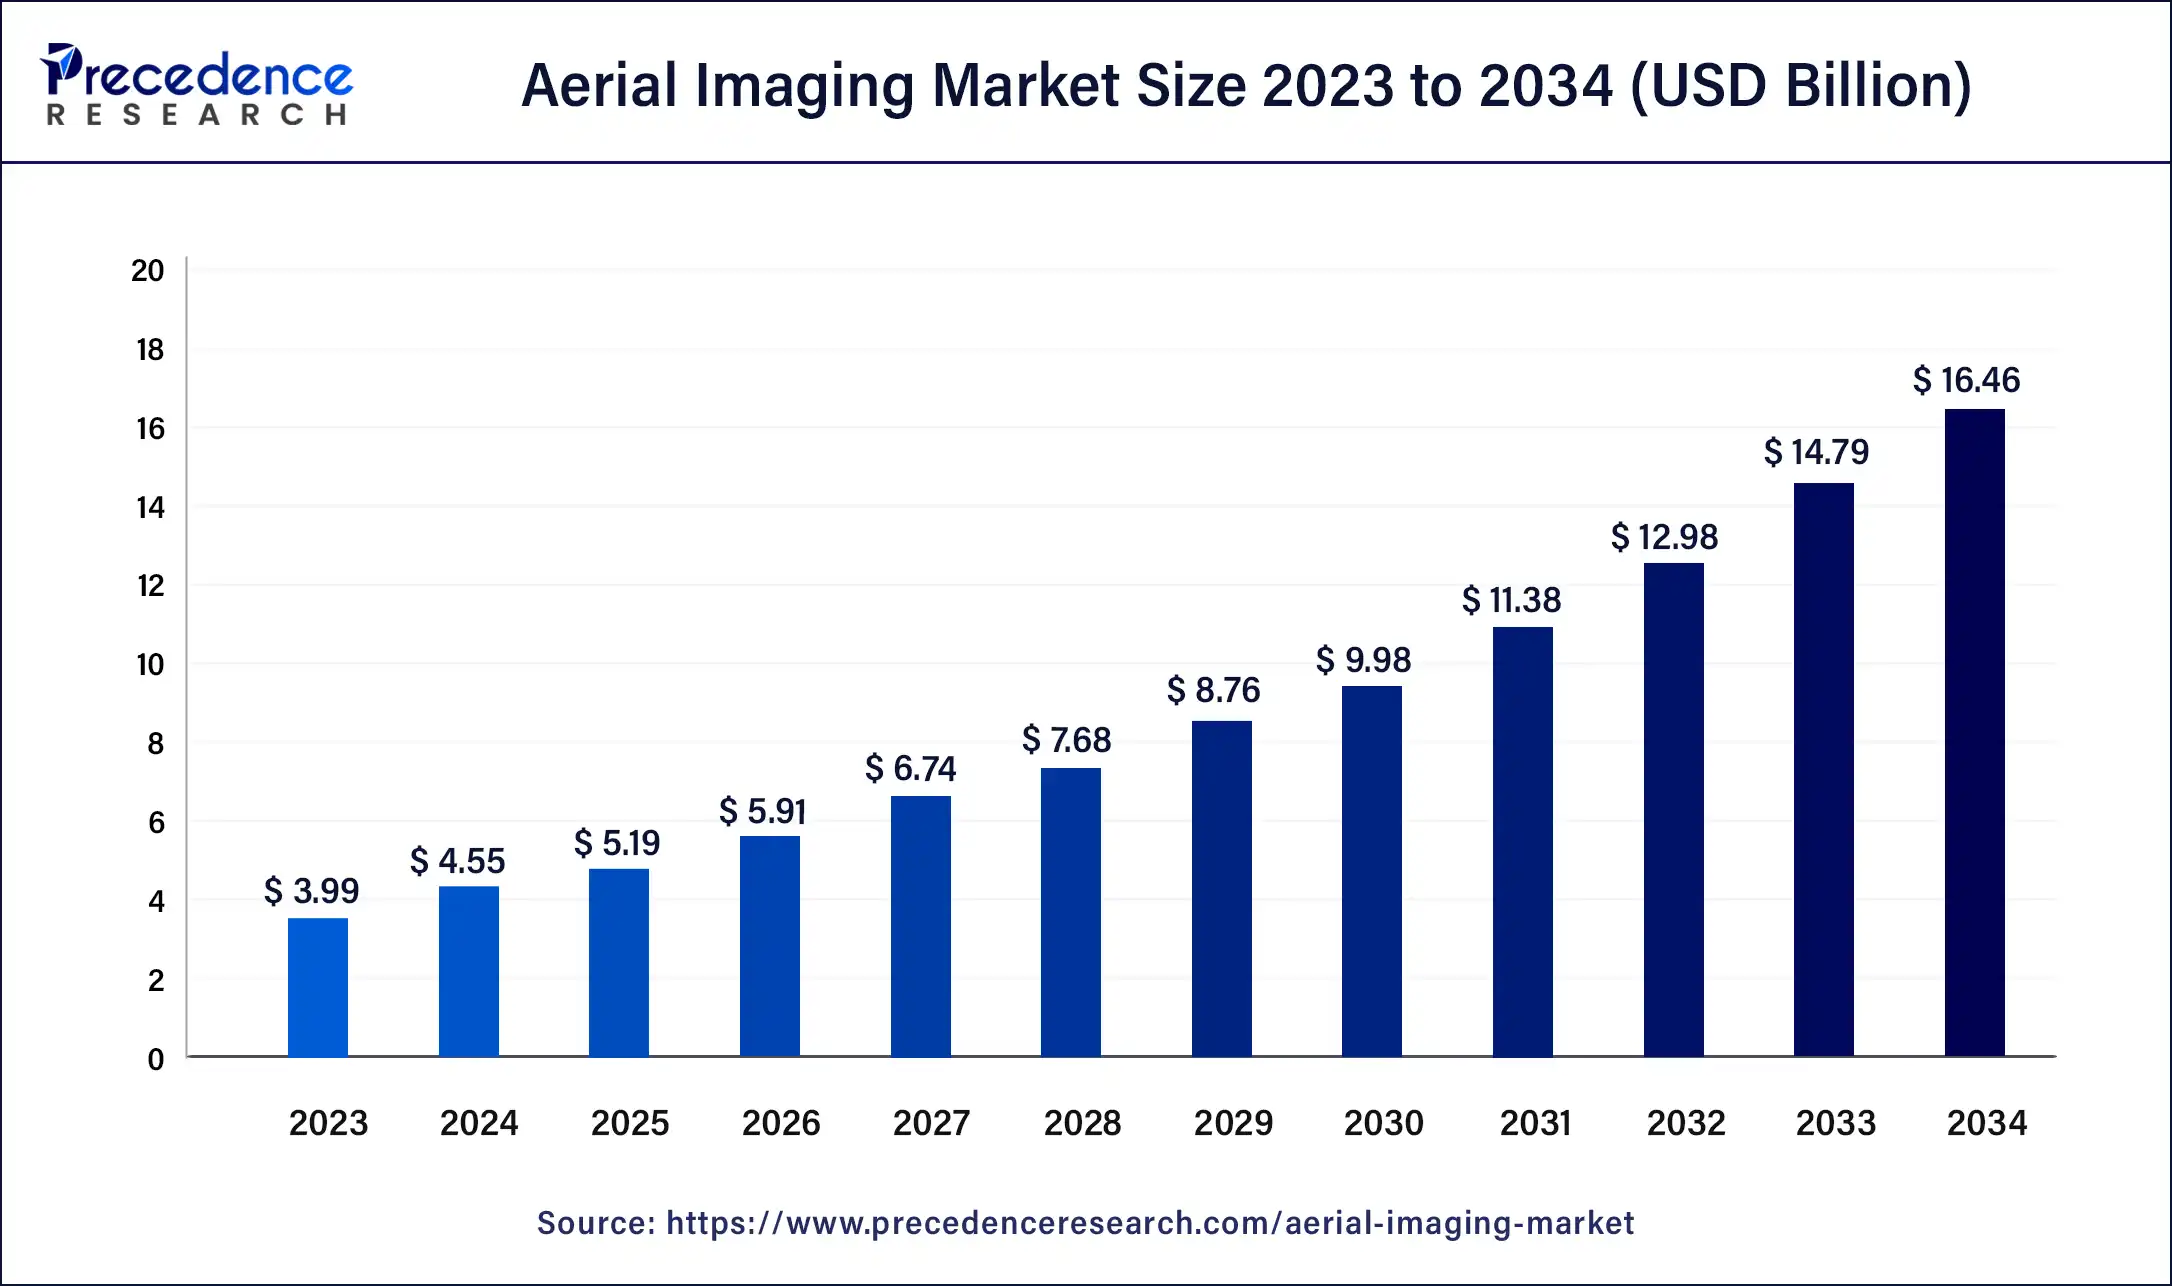 Aerial Imaging Market Size 2024 to 2034